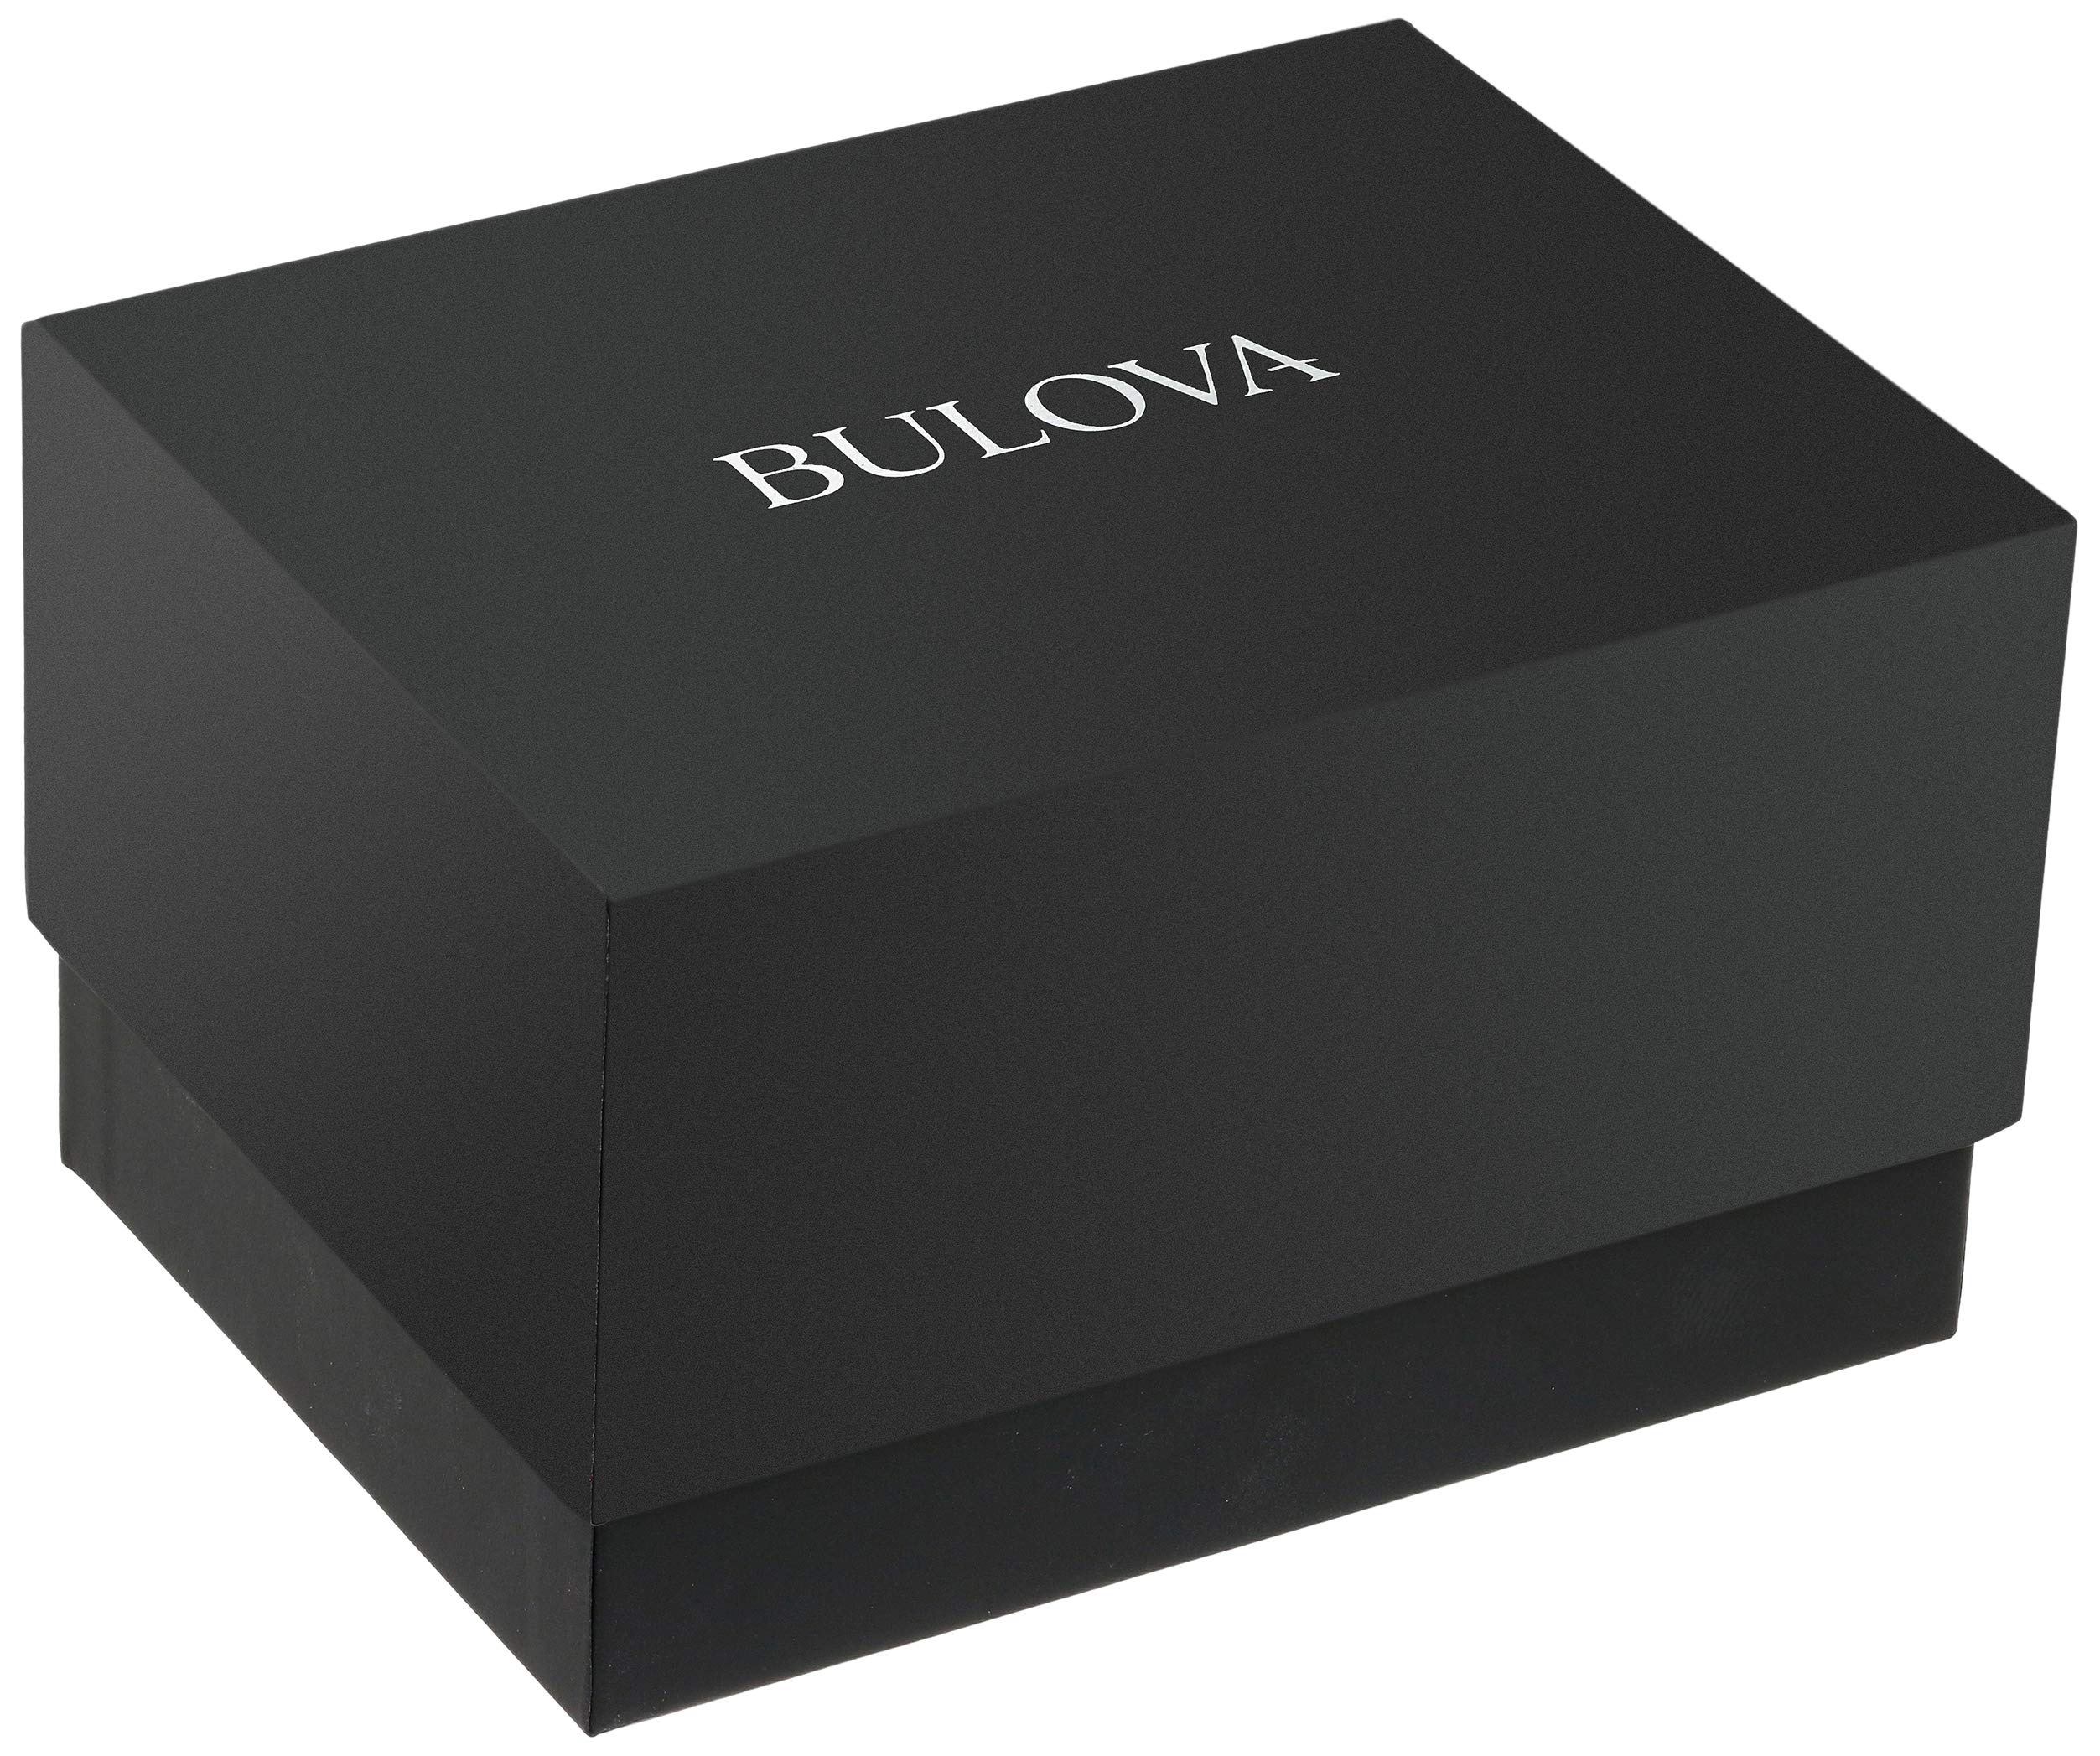 Bulova Men's Crystal Accented Gift Set with 3-Hand Date Quartz Watch and Dog Tag Box Chain Necklace